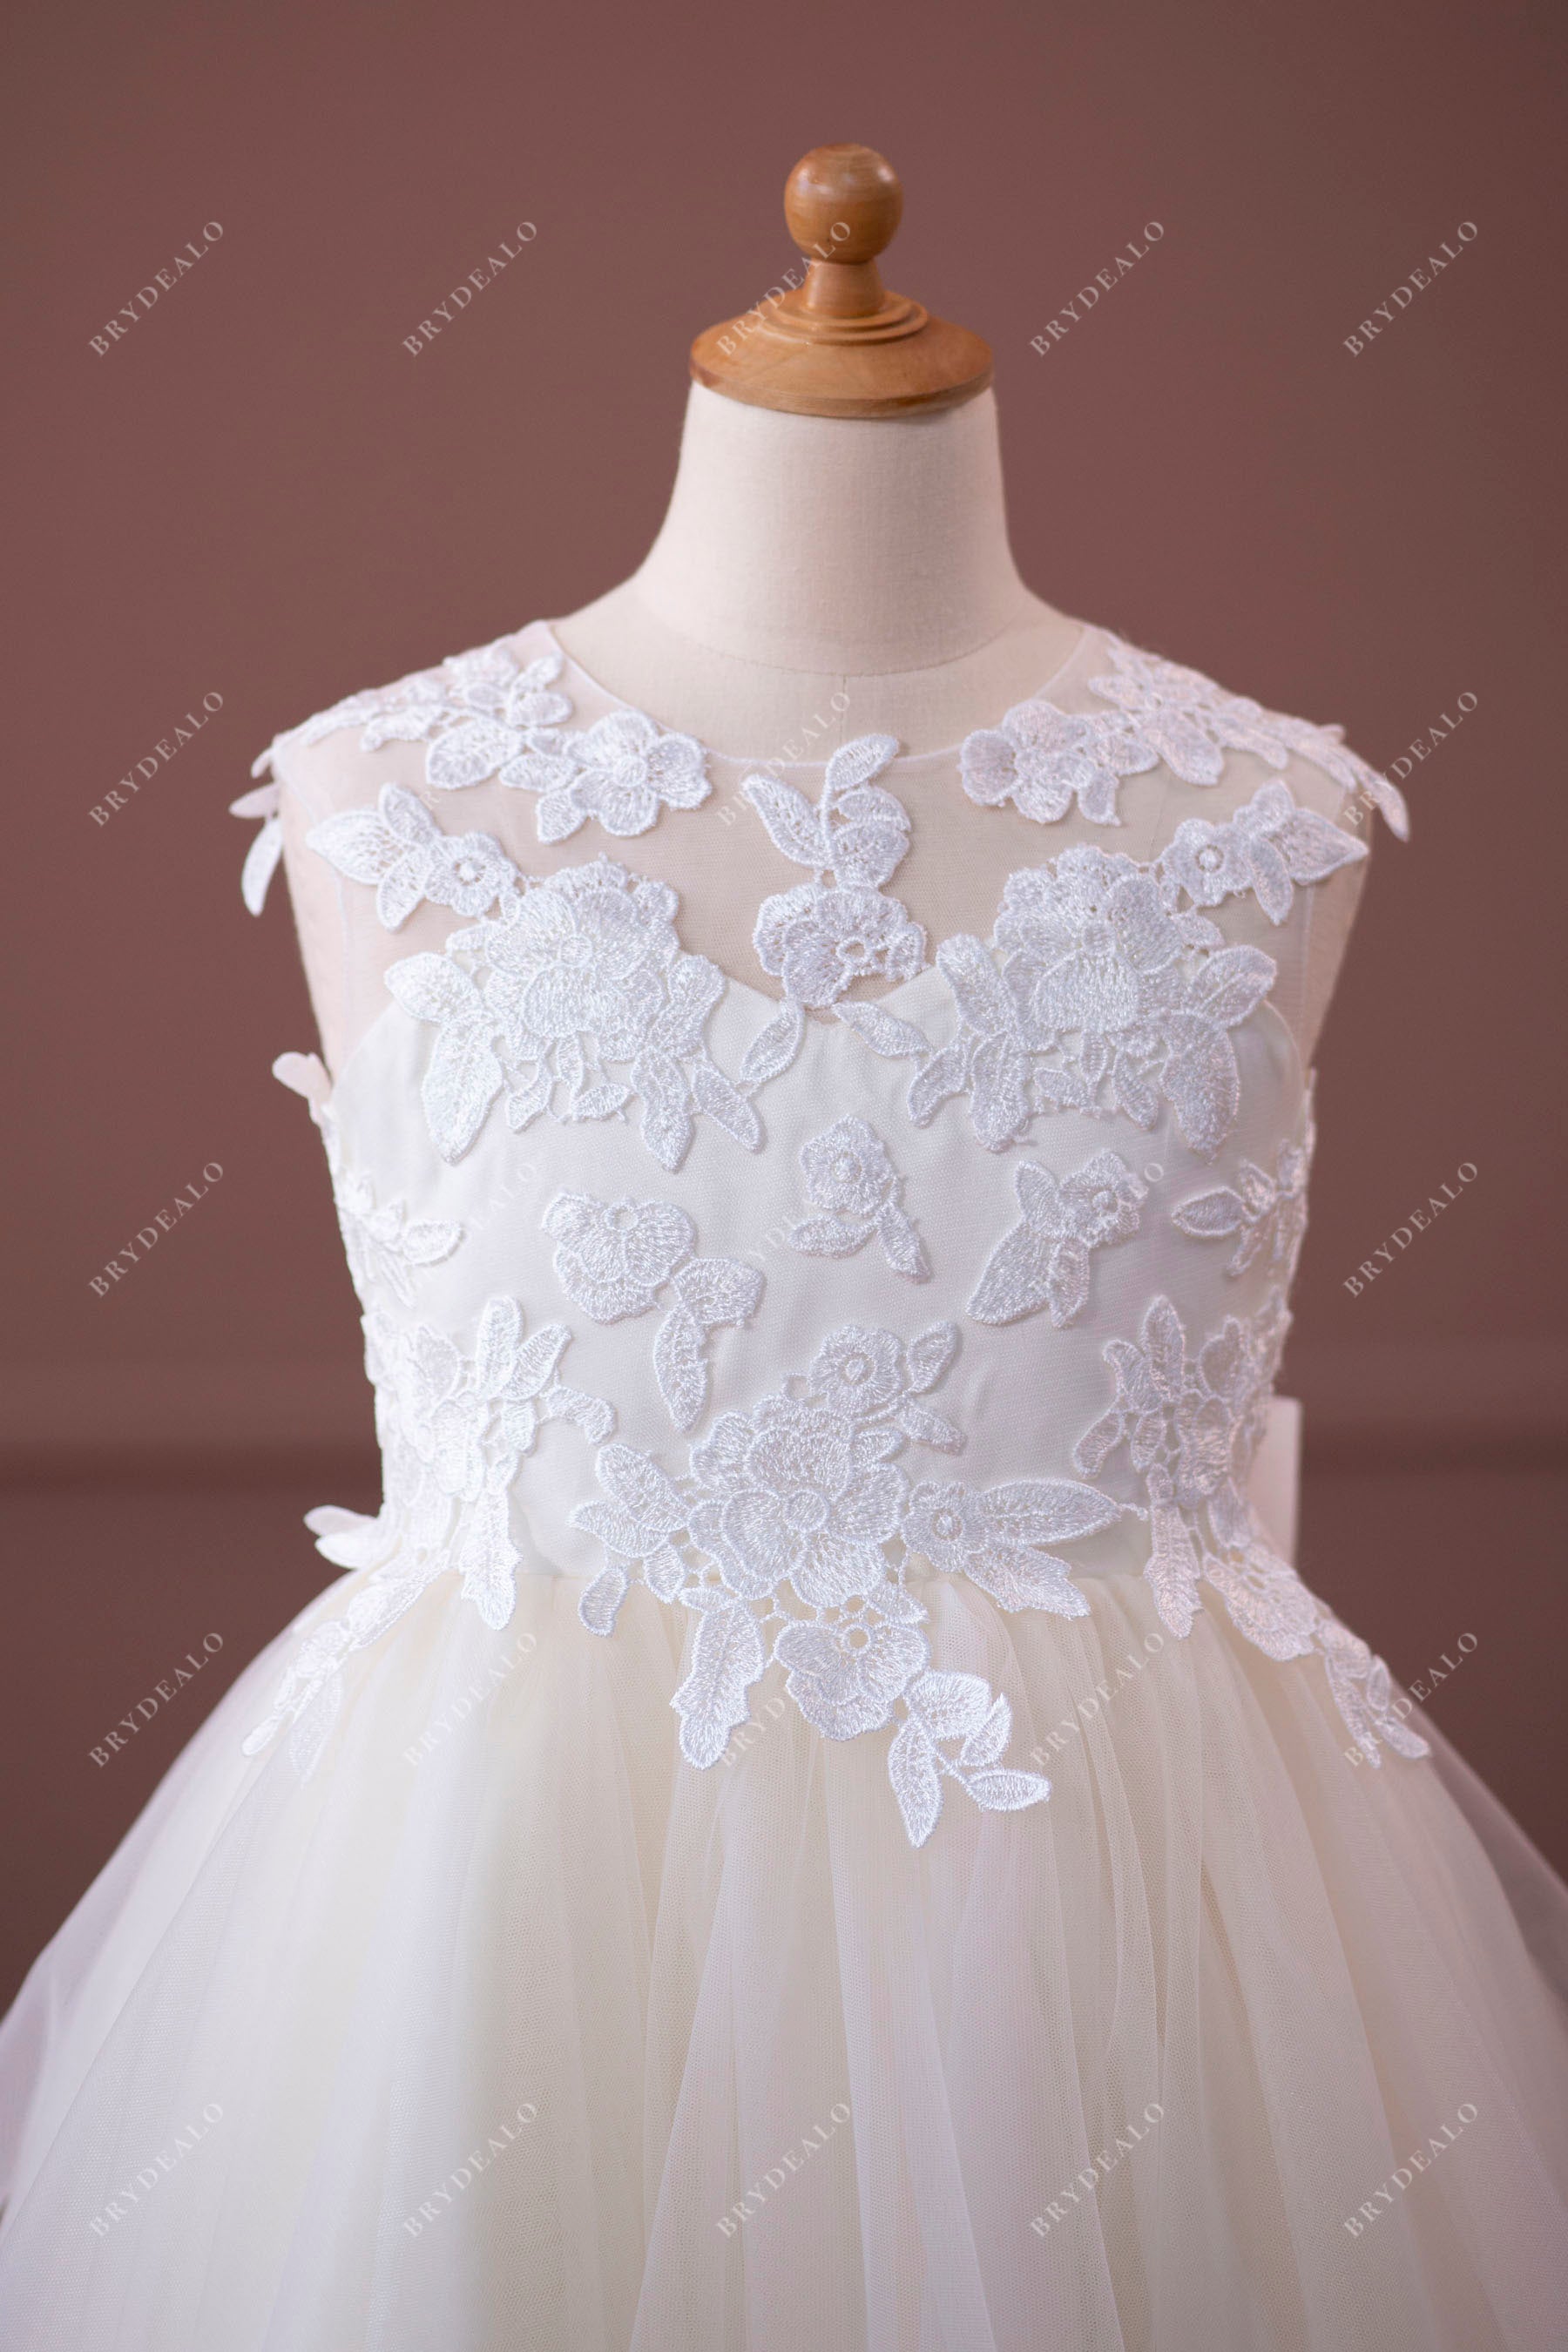 wholesale lace tulle flower girl dress